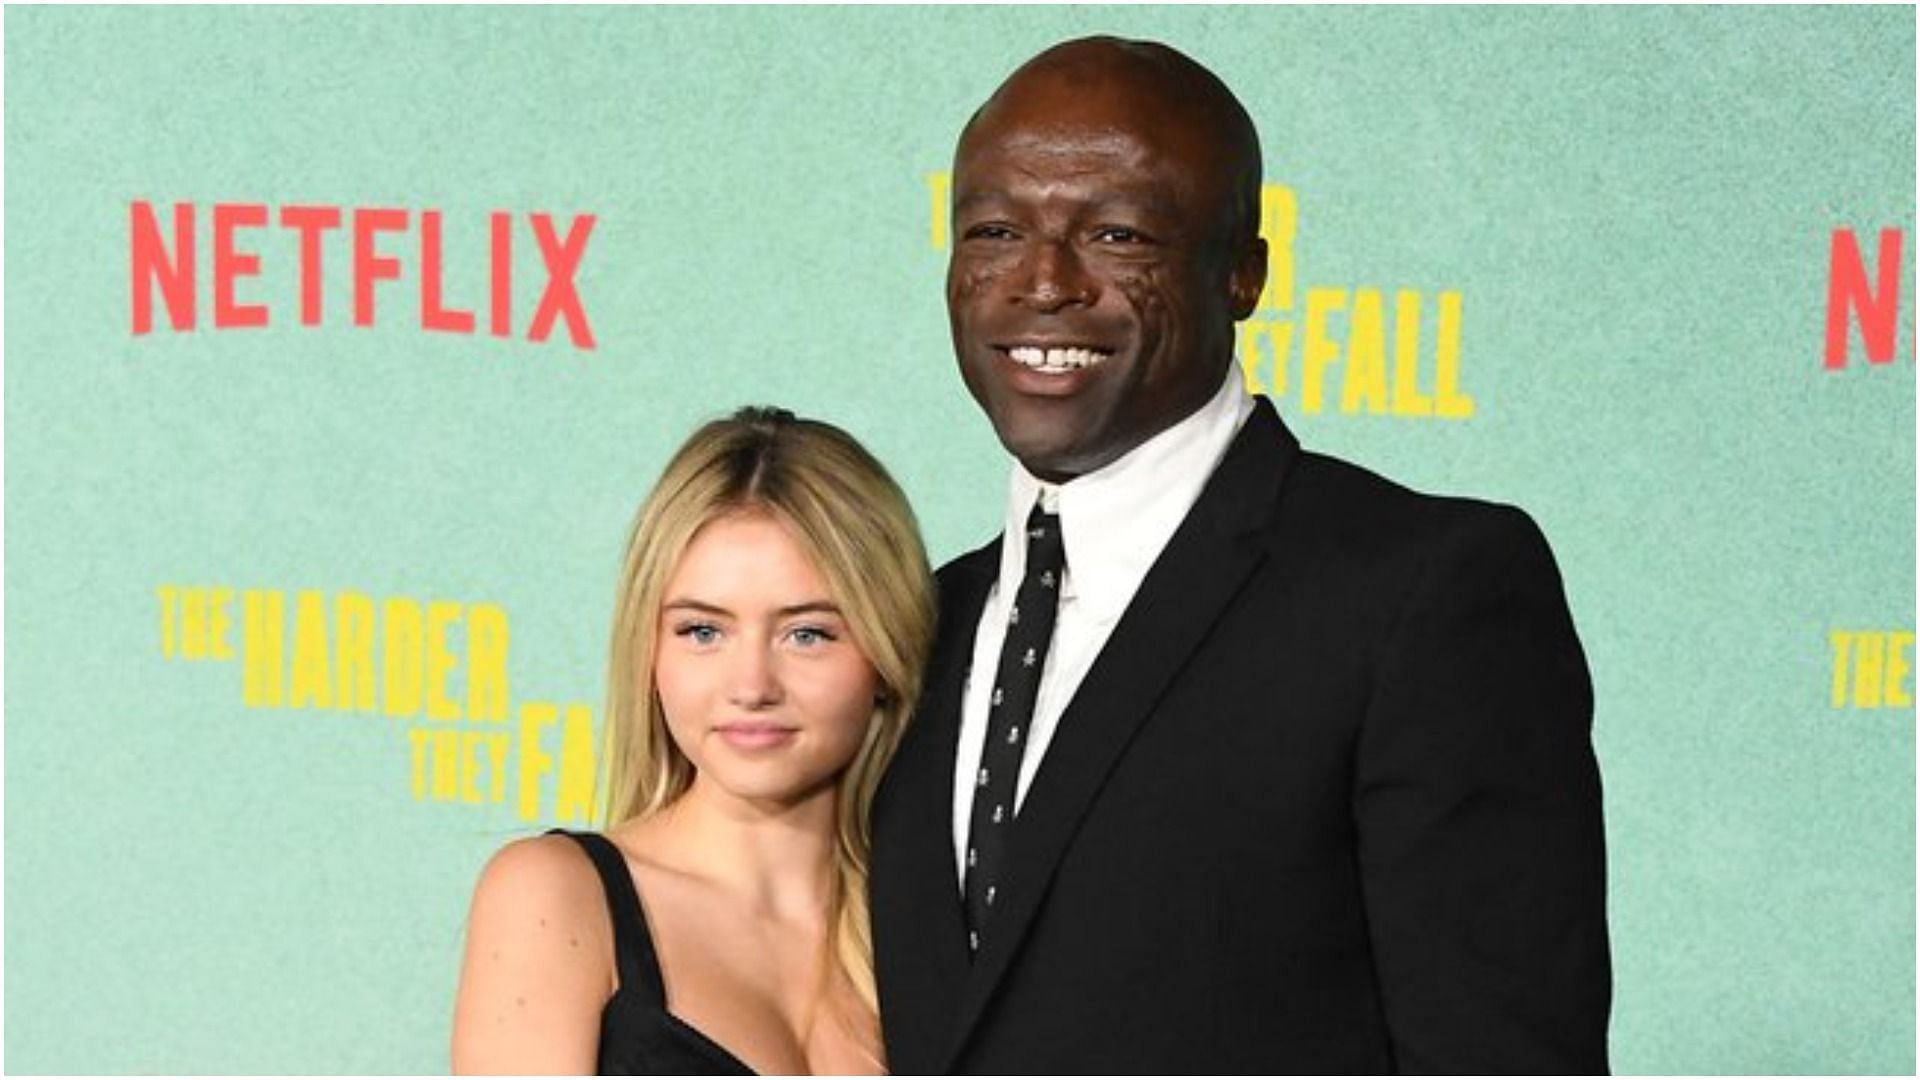 Seal and Leni Klum made a rare public appearance on the red carpet of a Netflix movie (Image via JustJared/Twitter)